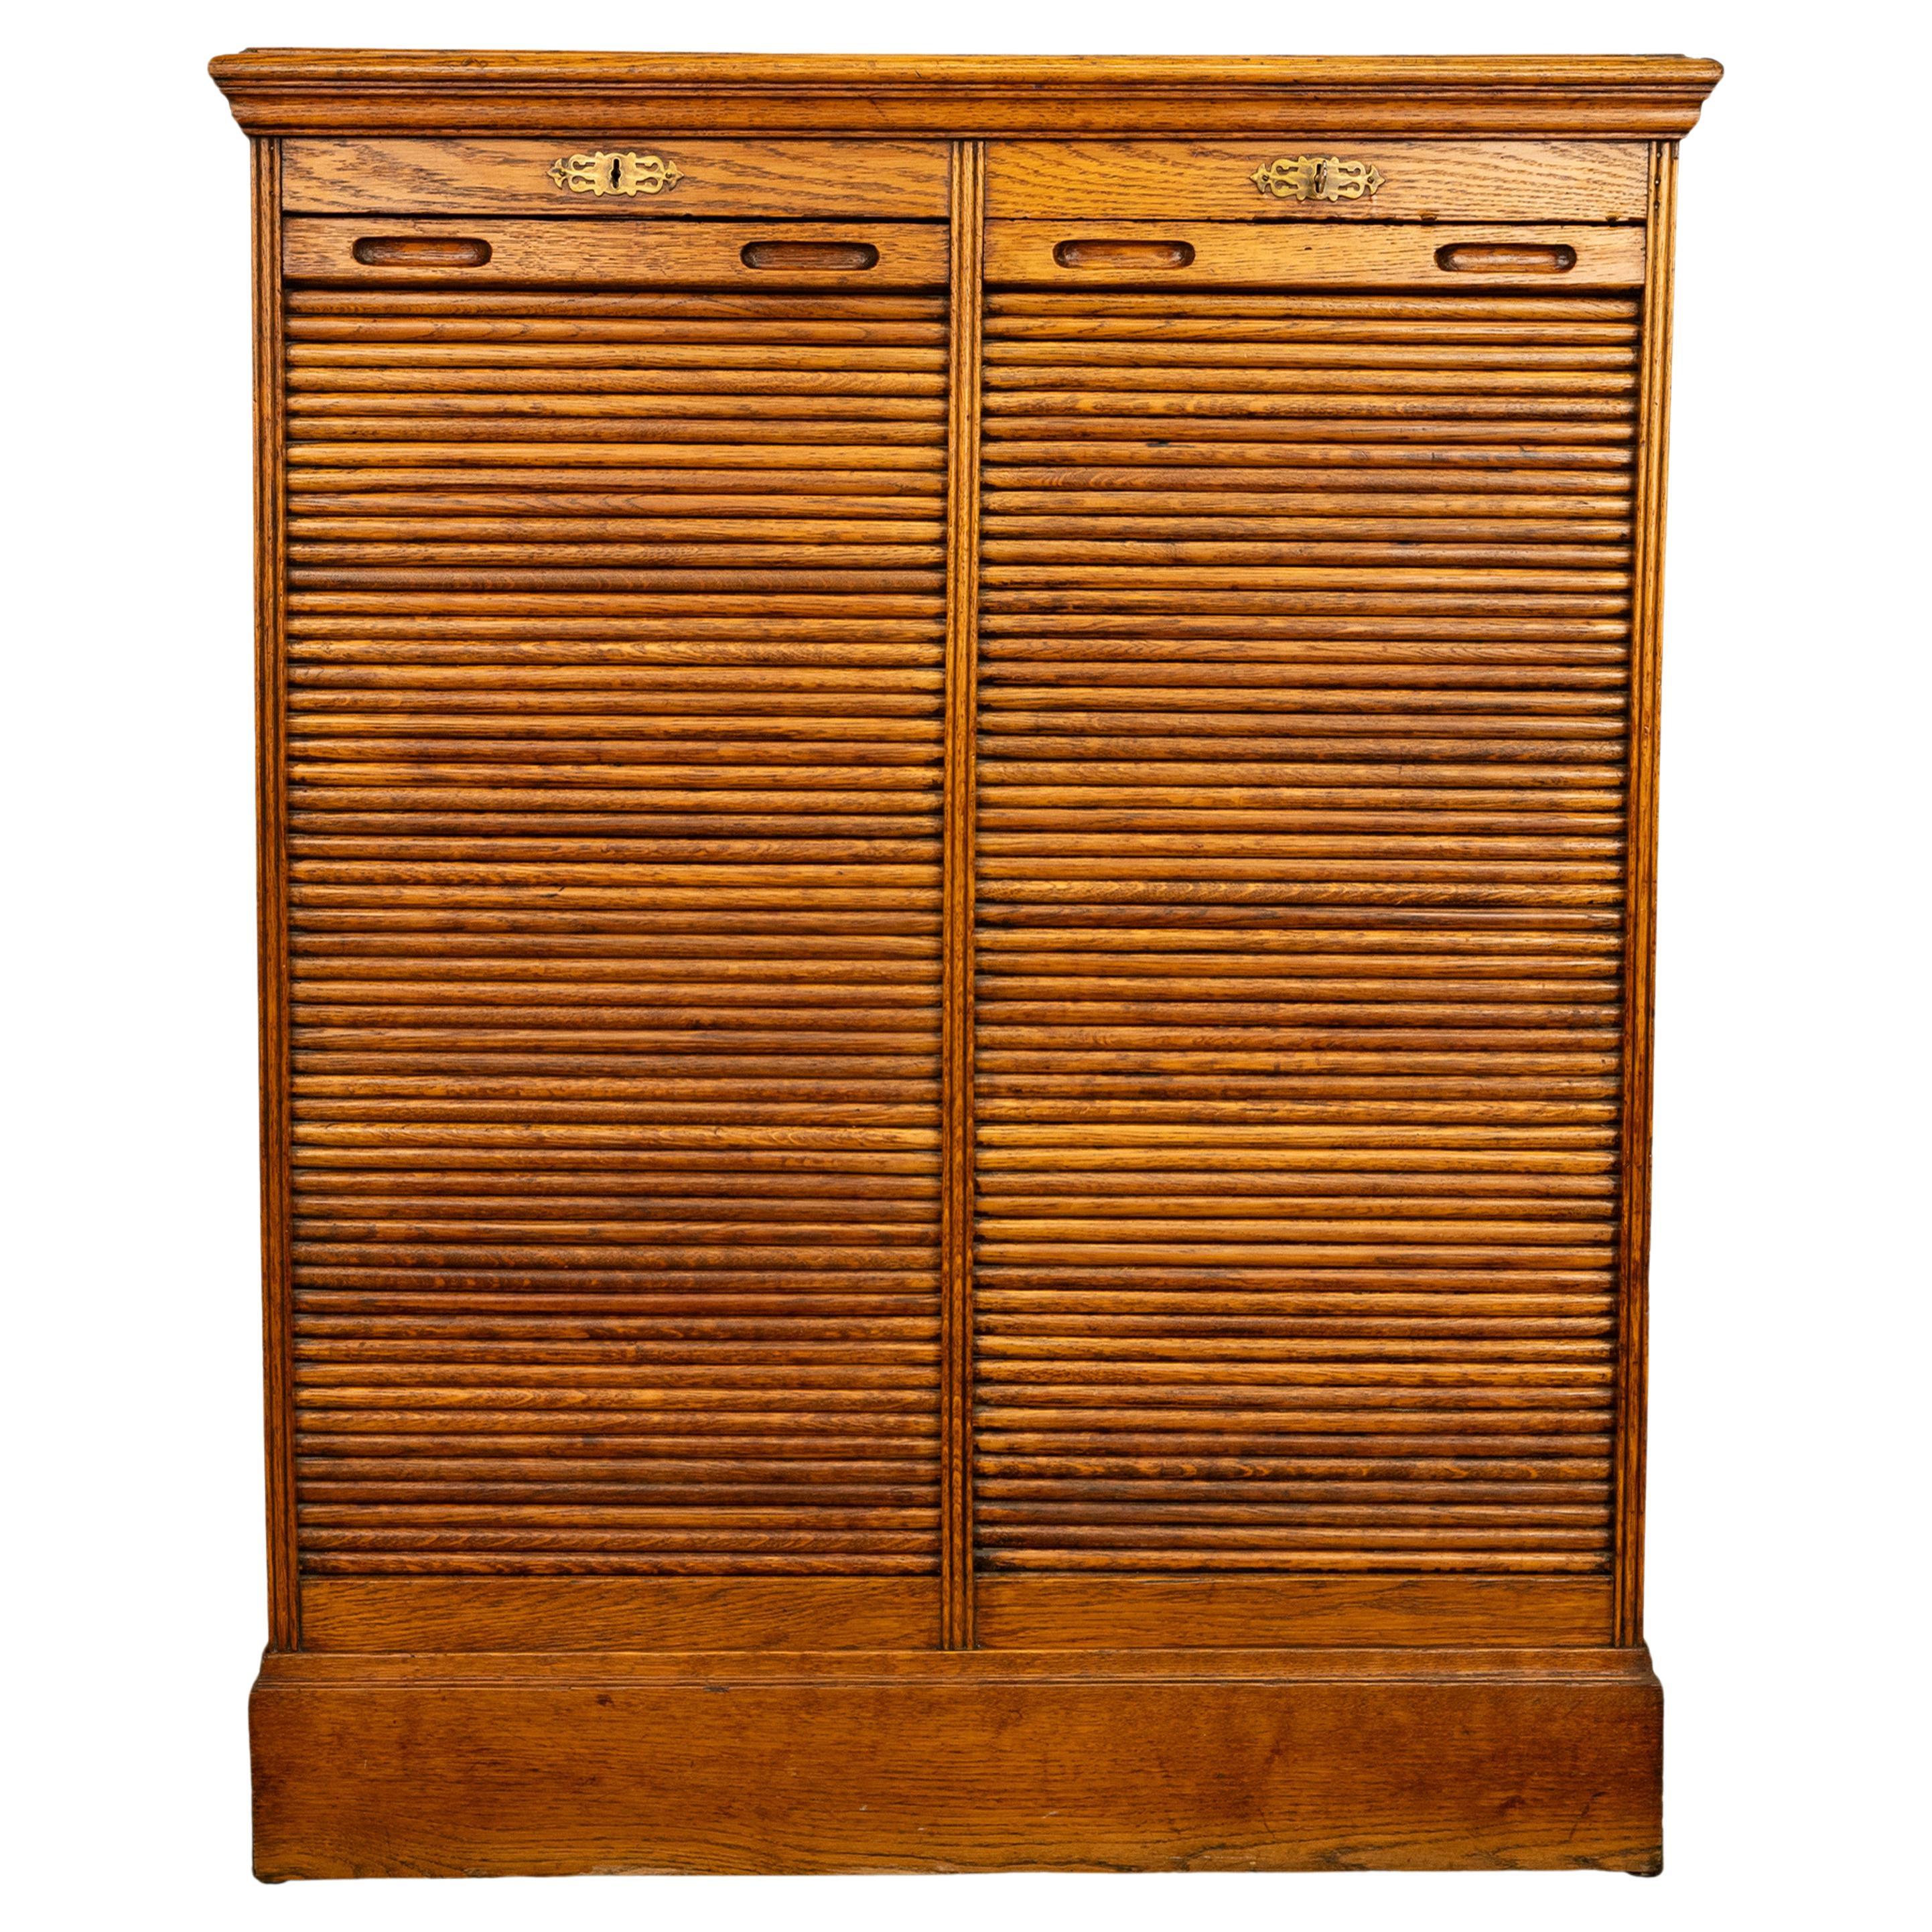 Antique American Oak Double Tambour Roll Top 16 Drawer Filing Cabinet 1910 For Sale